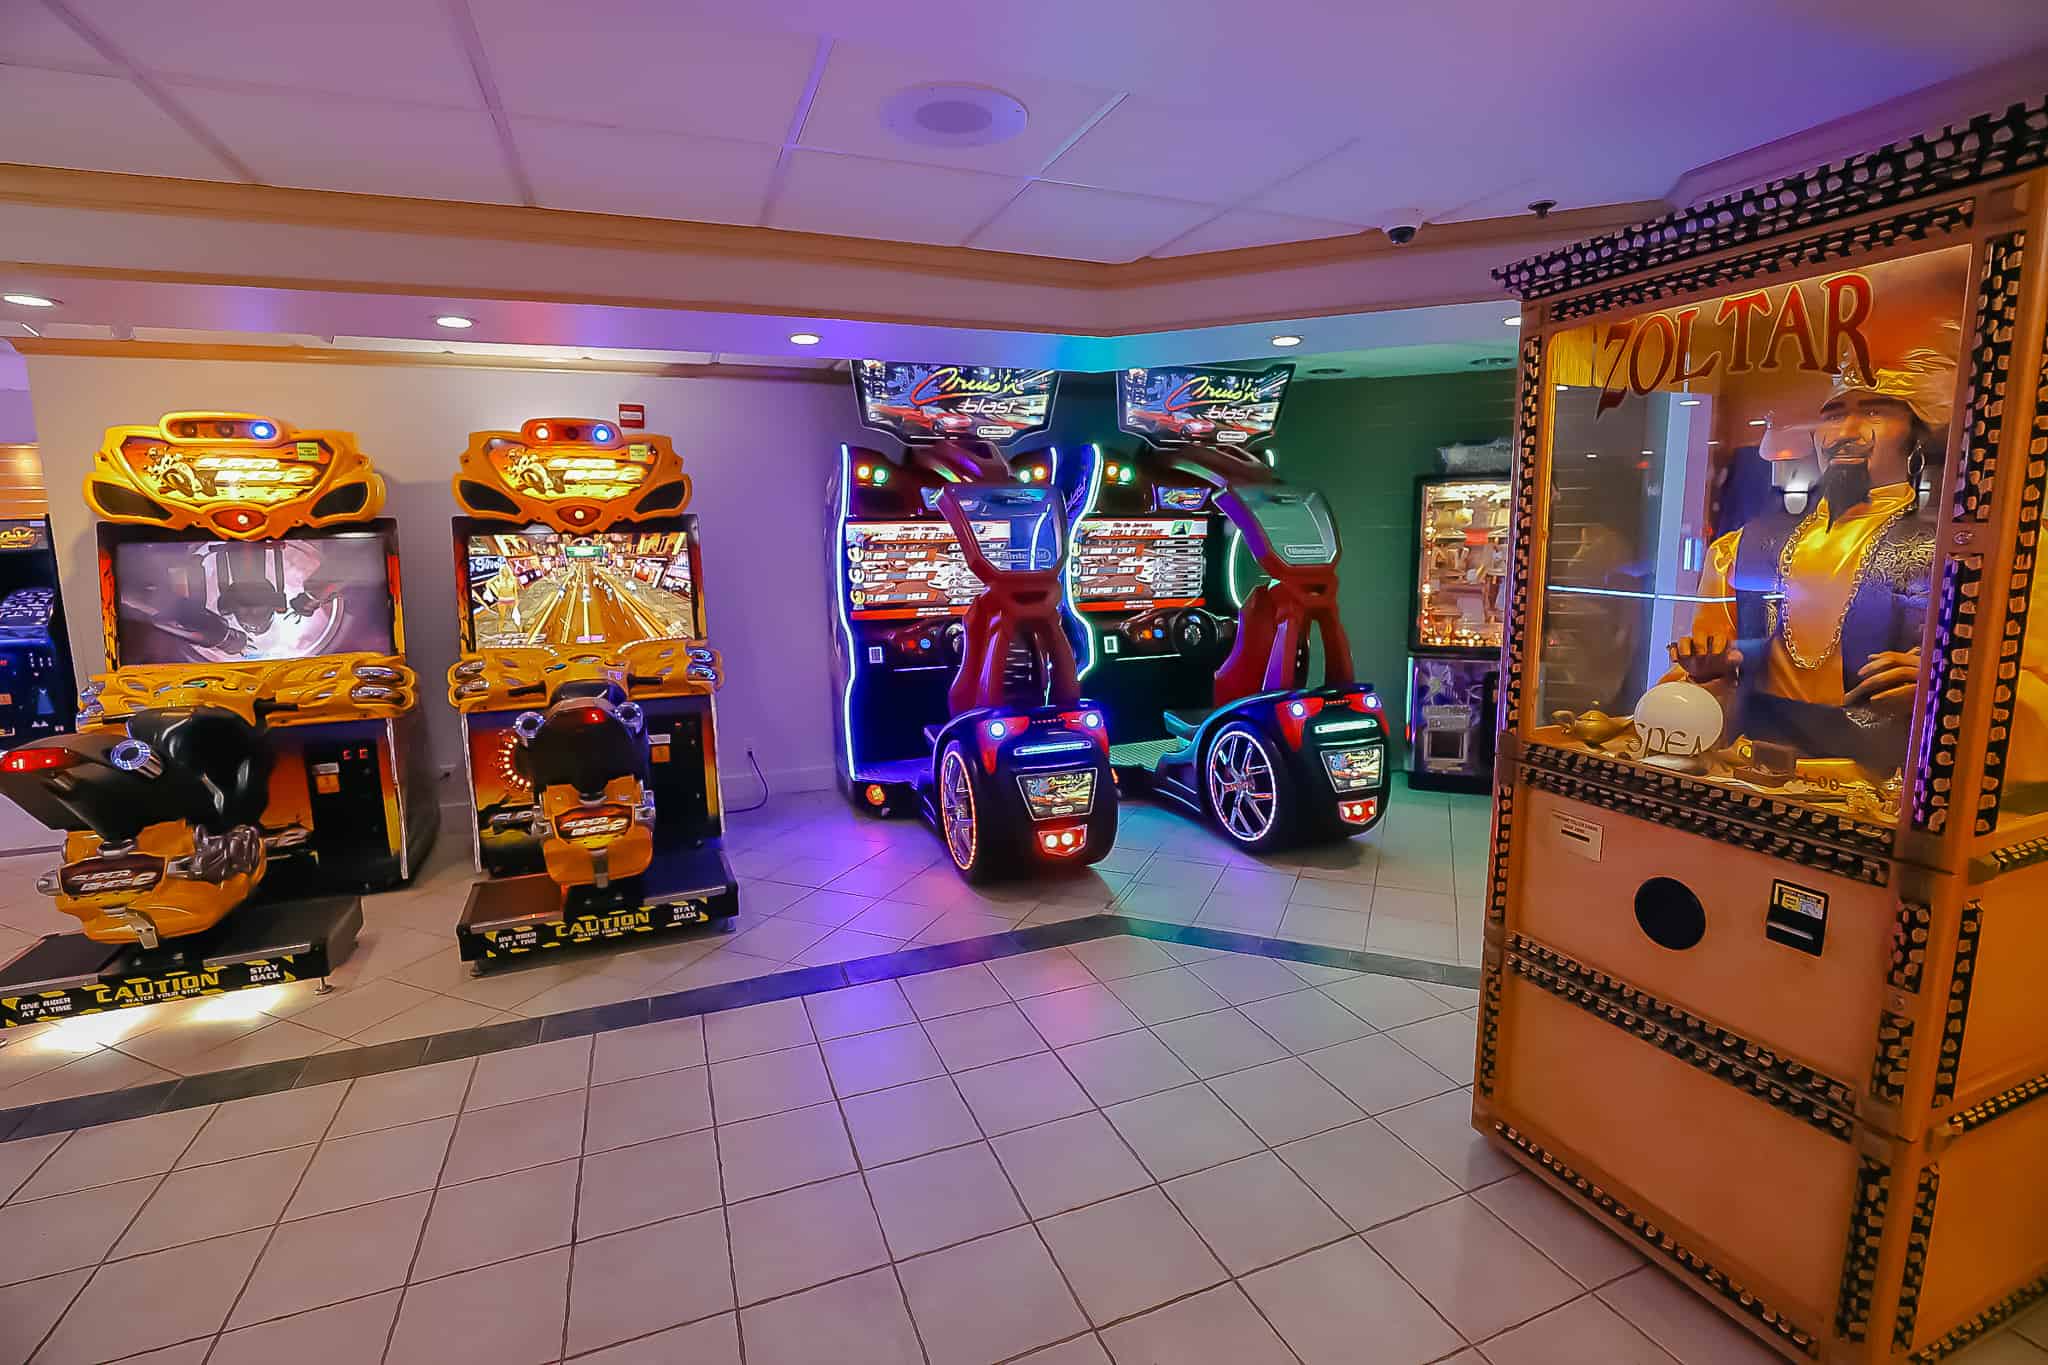 arcade with various games and an old-fashioned Zoltar machine 